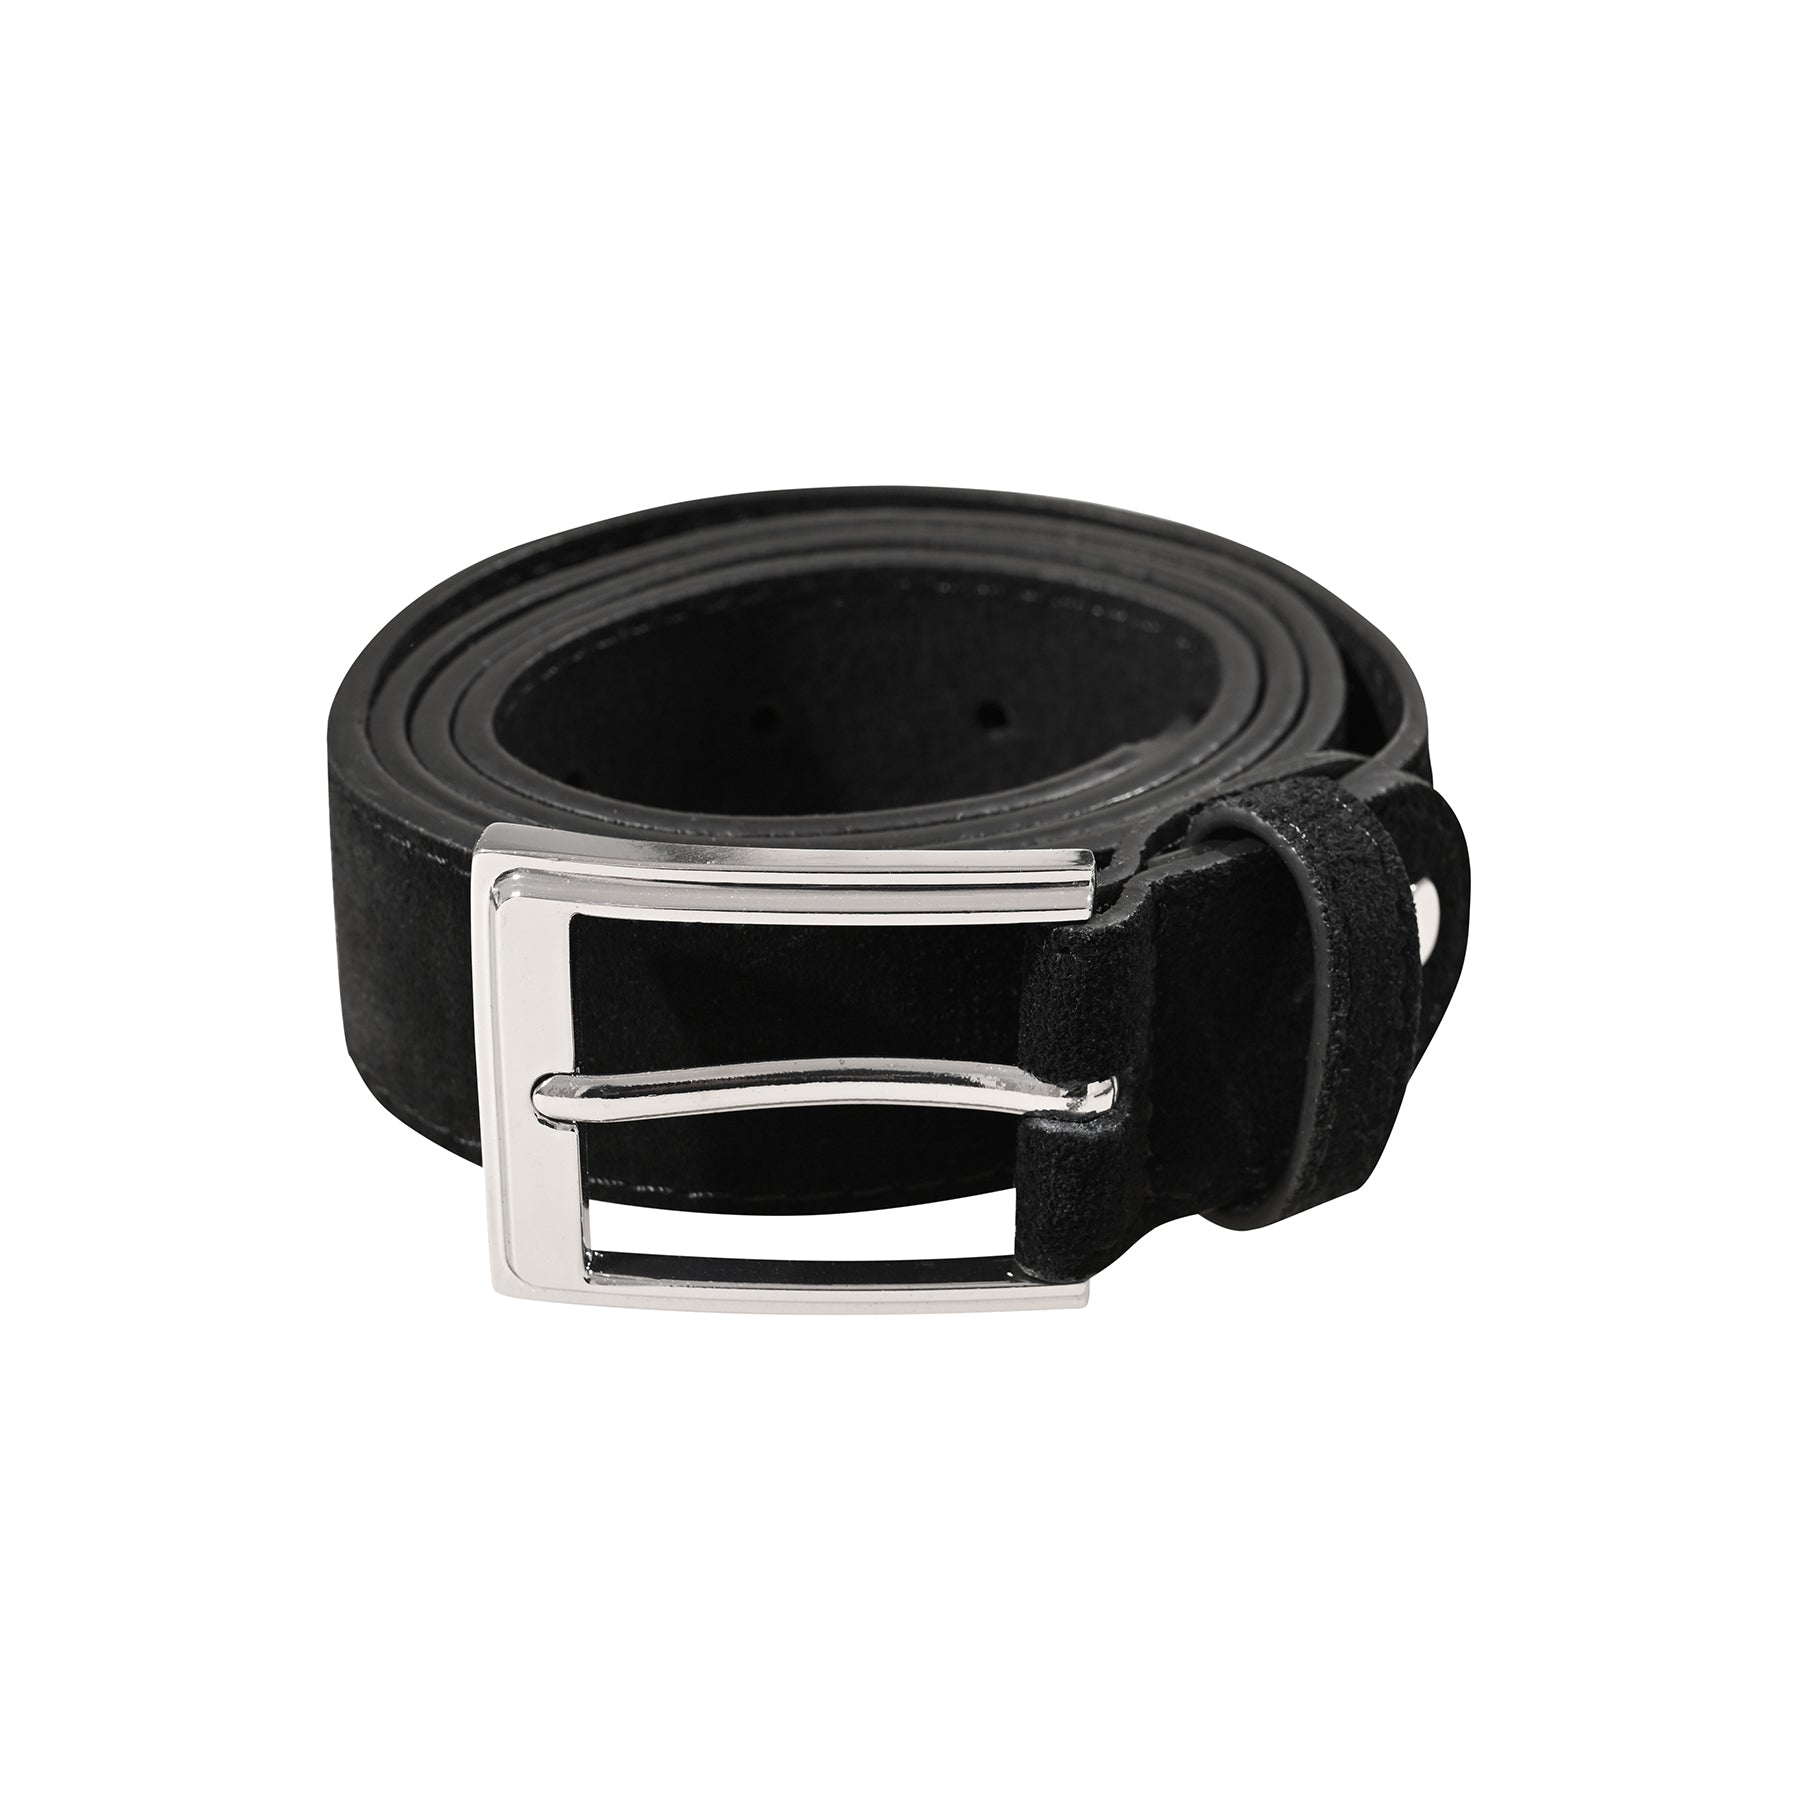 View Mens Leather Belt in Black Leather information